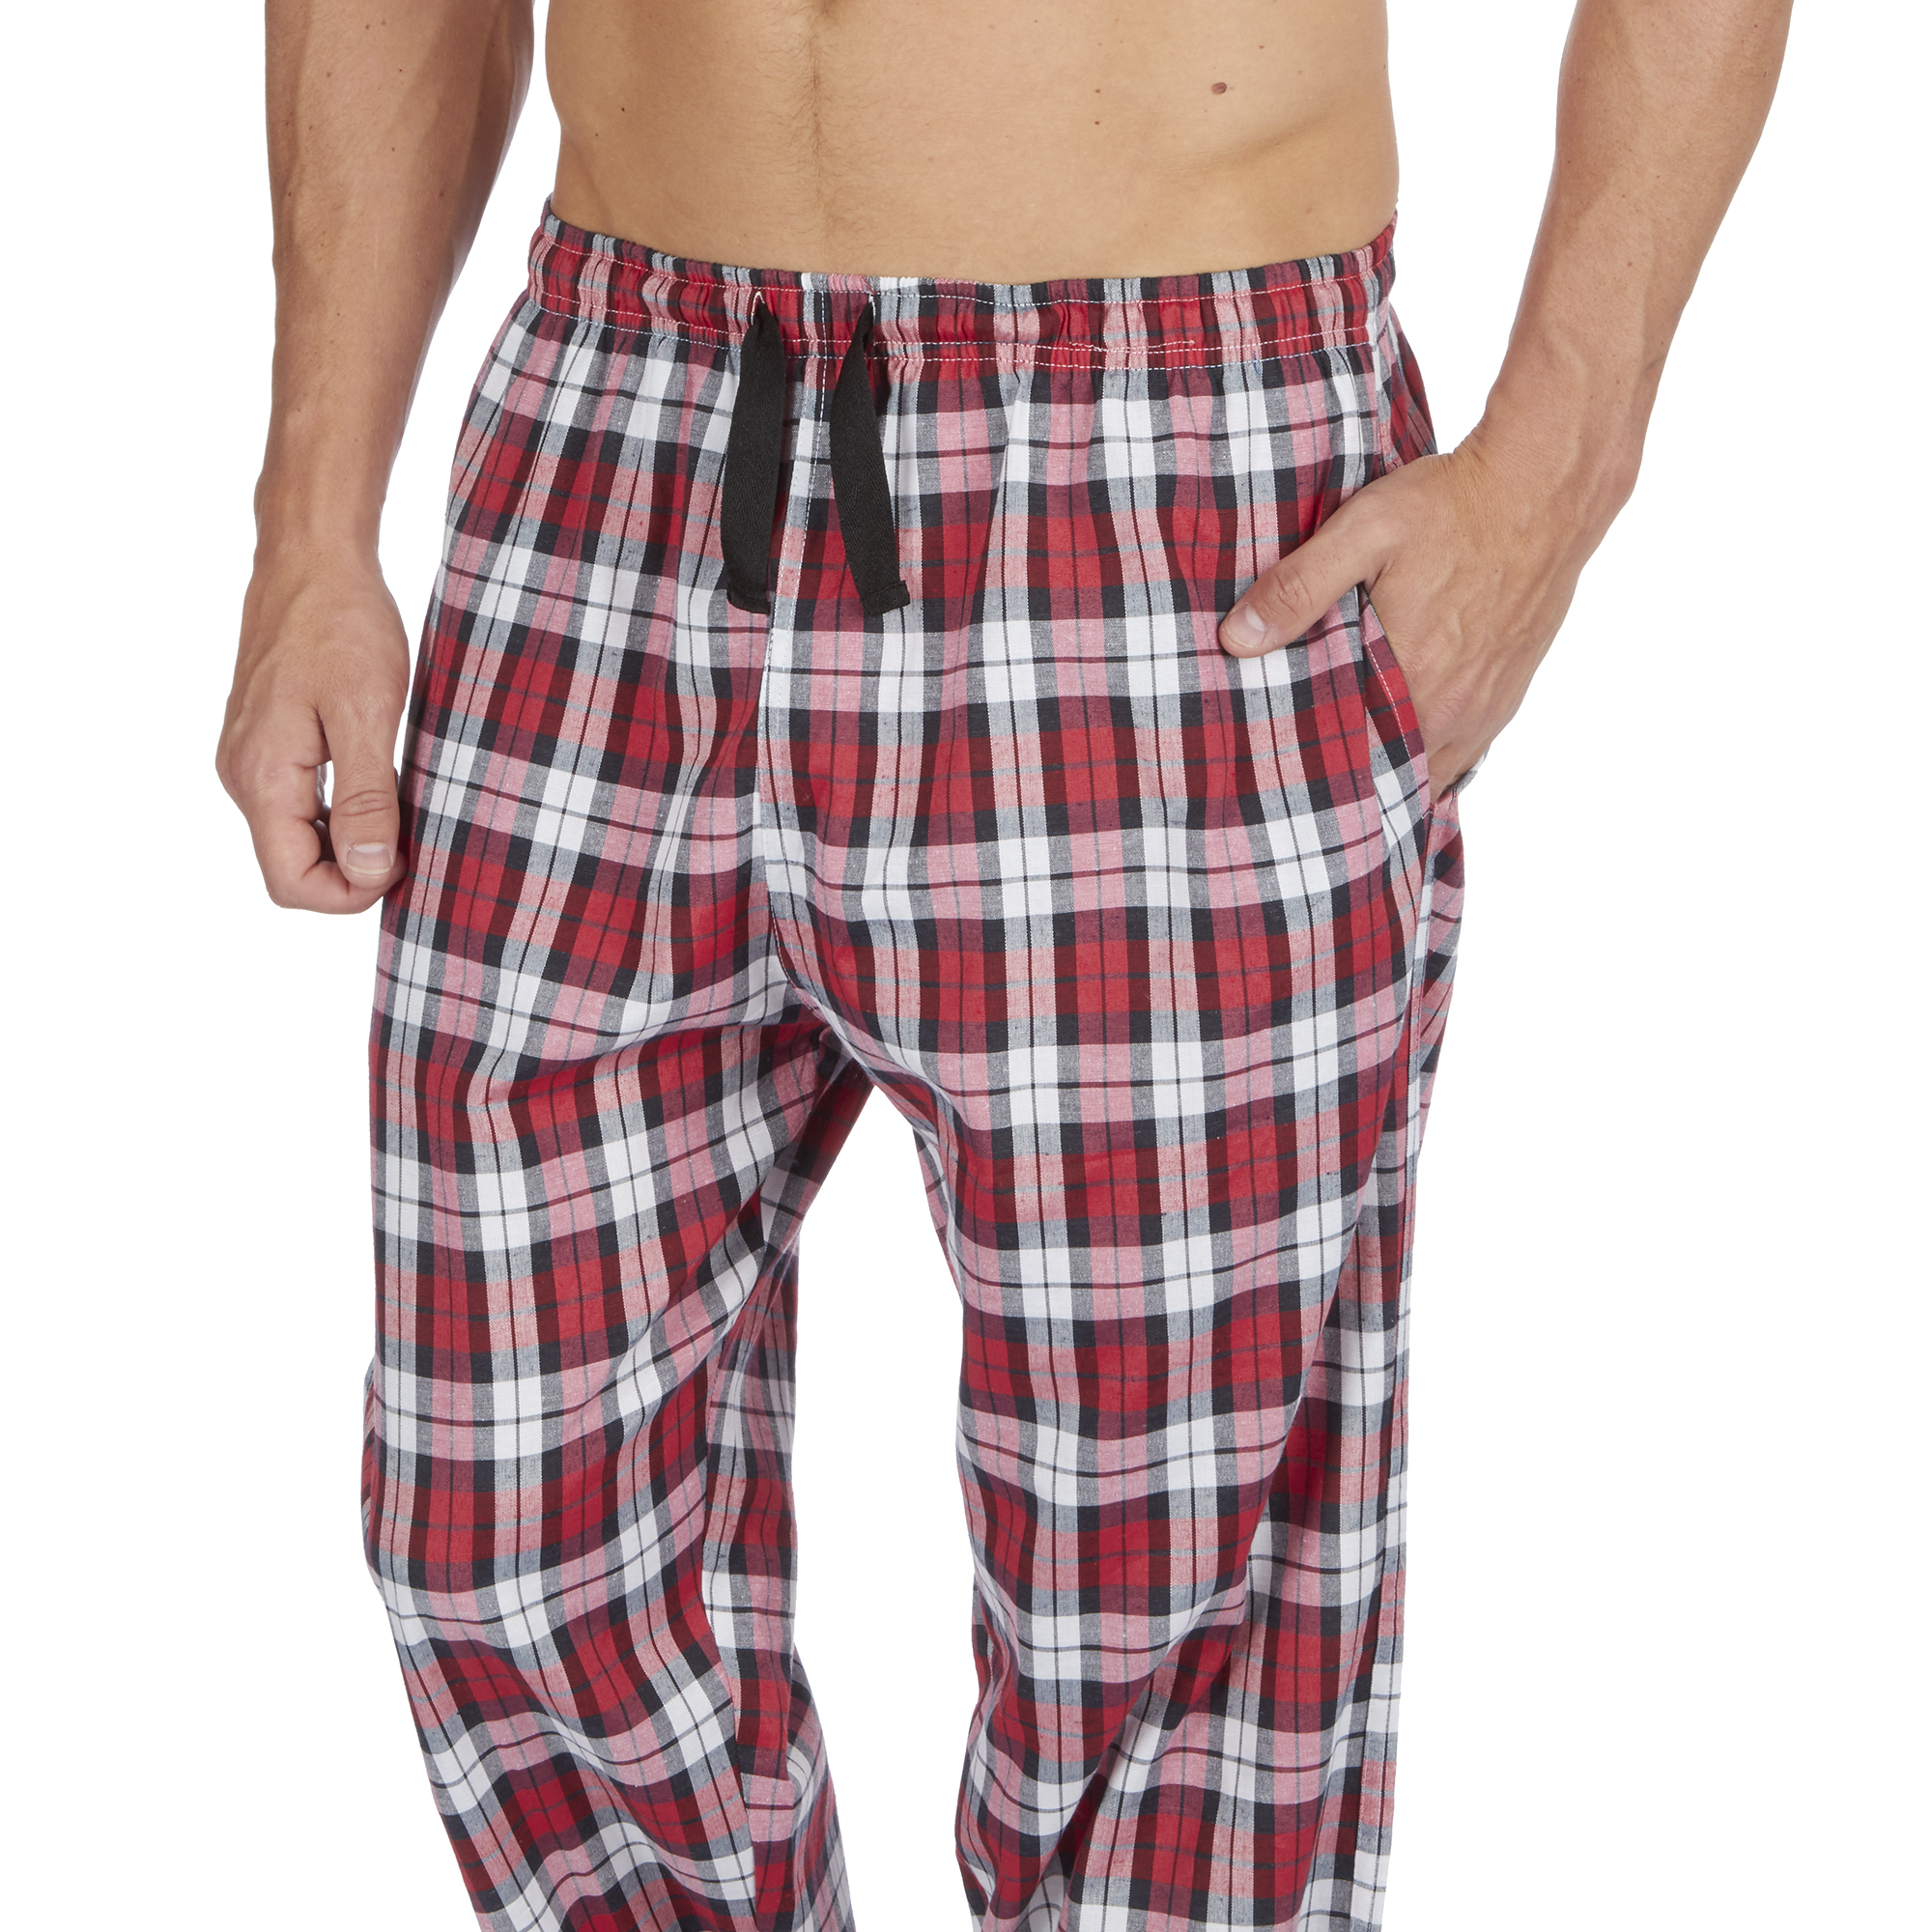 Men's Woven Lounge Bed Pants Pyjama Bottoms Checked Trousers Twill PJ S ...